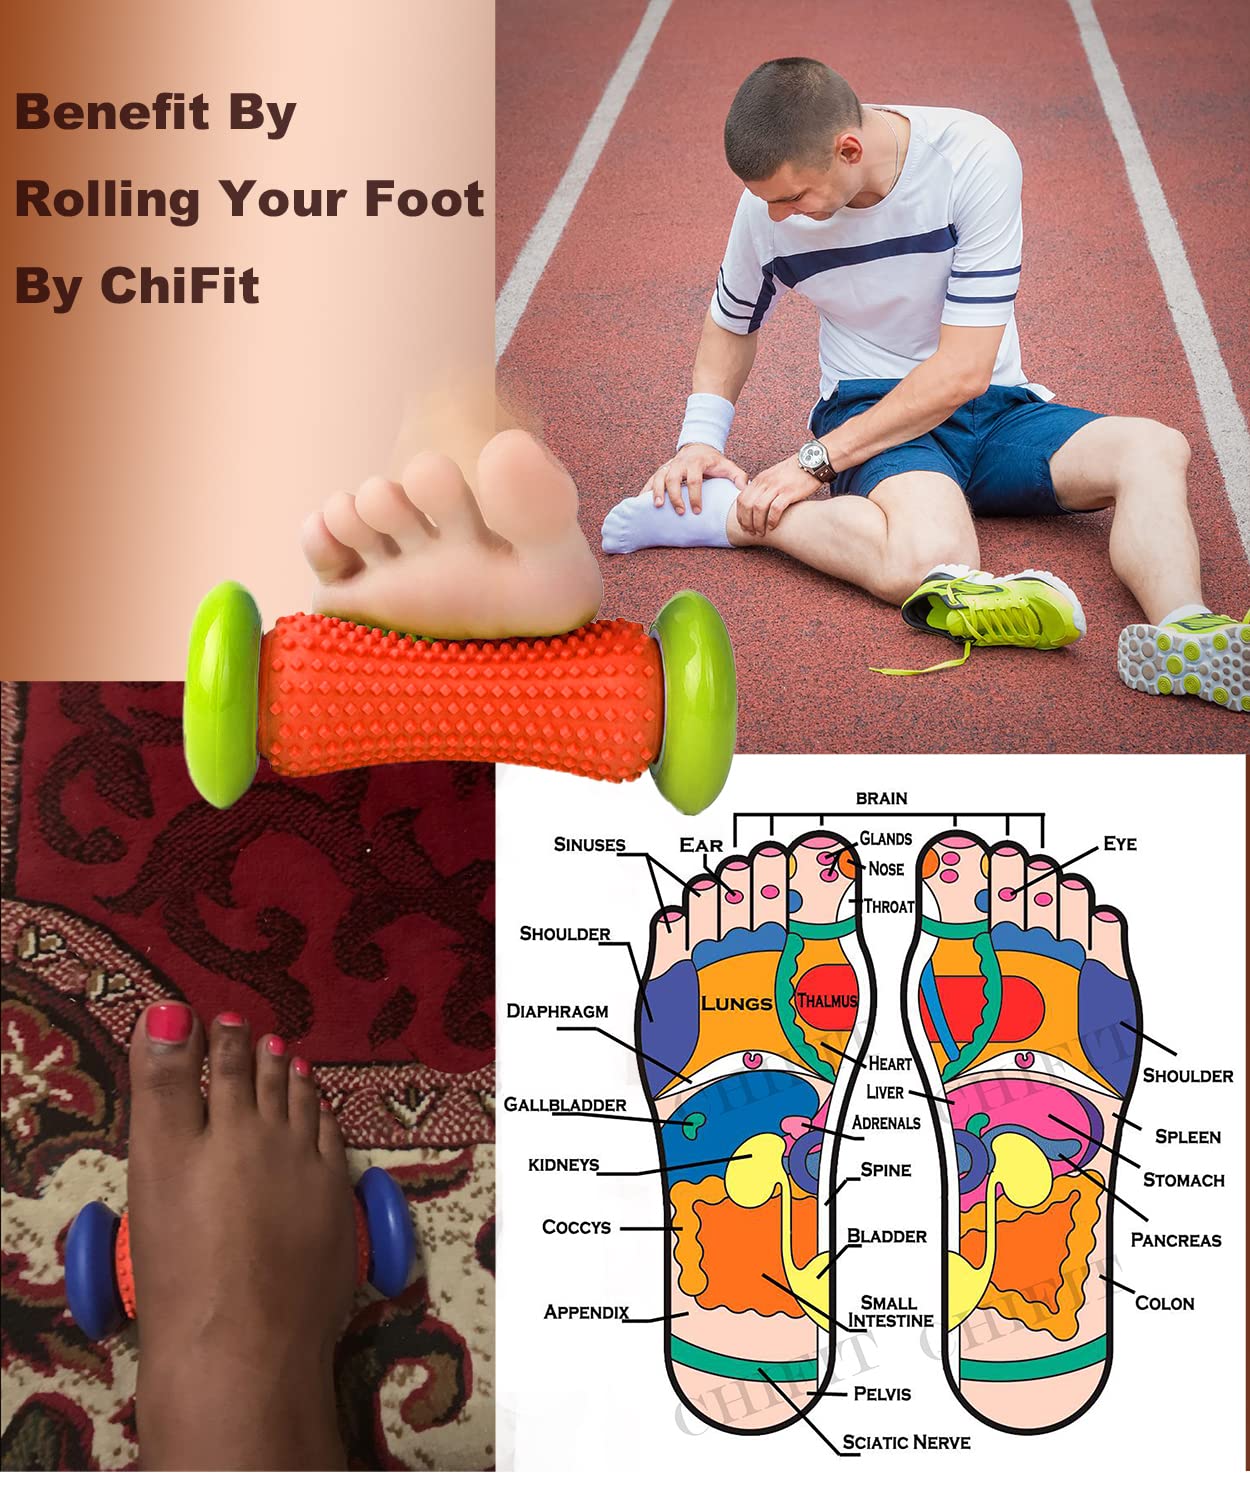 ChiFit Reflexology Foot Massager Tool, Plantar Fasciitis Relieve Diabetic Neuropathy,Acupressure Trigger Point Therapy, Heel Arch Arthritis